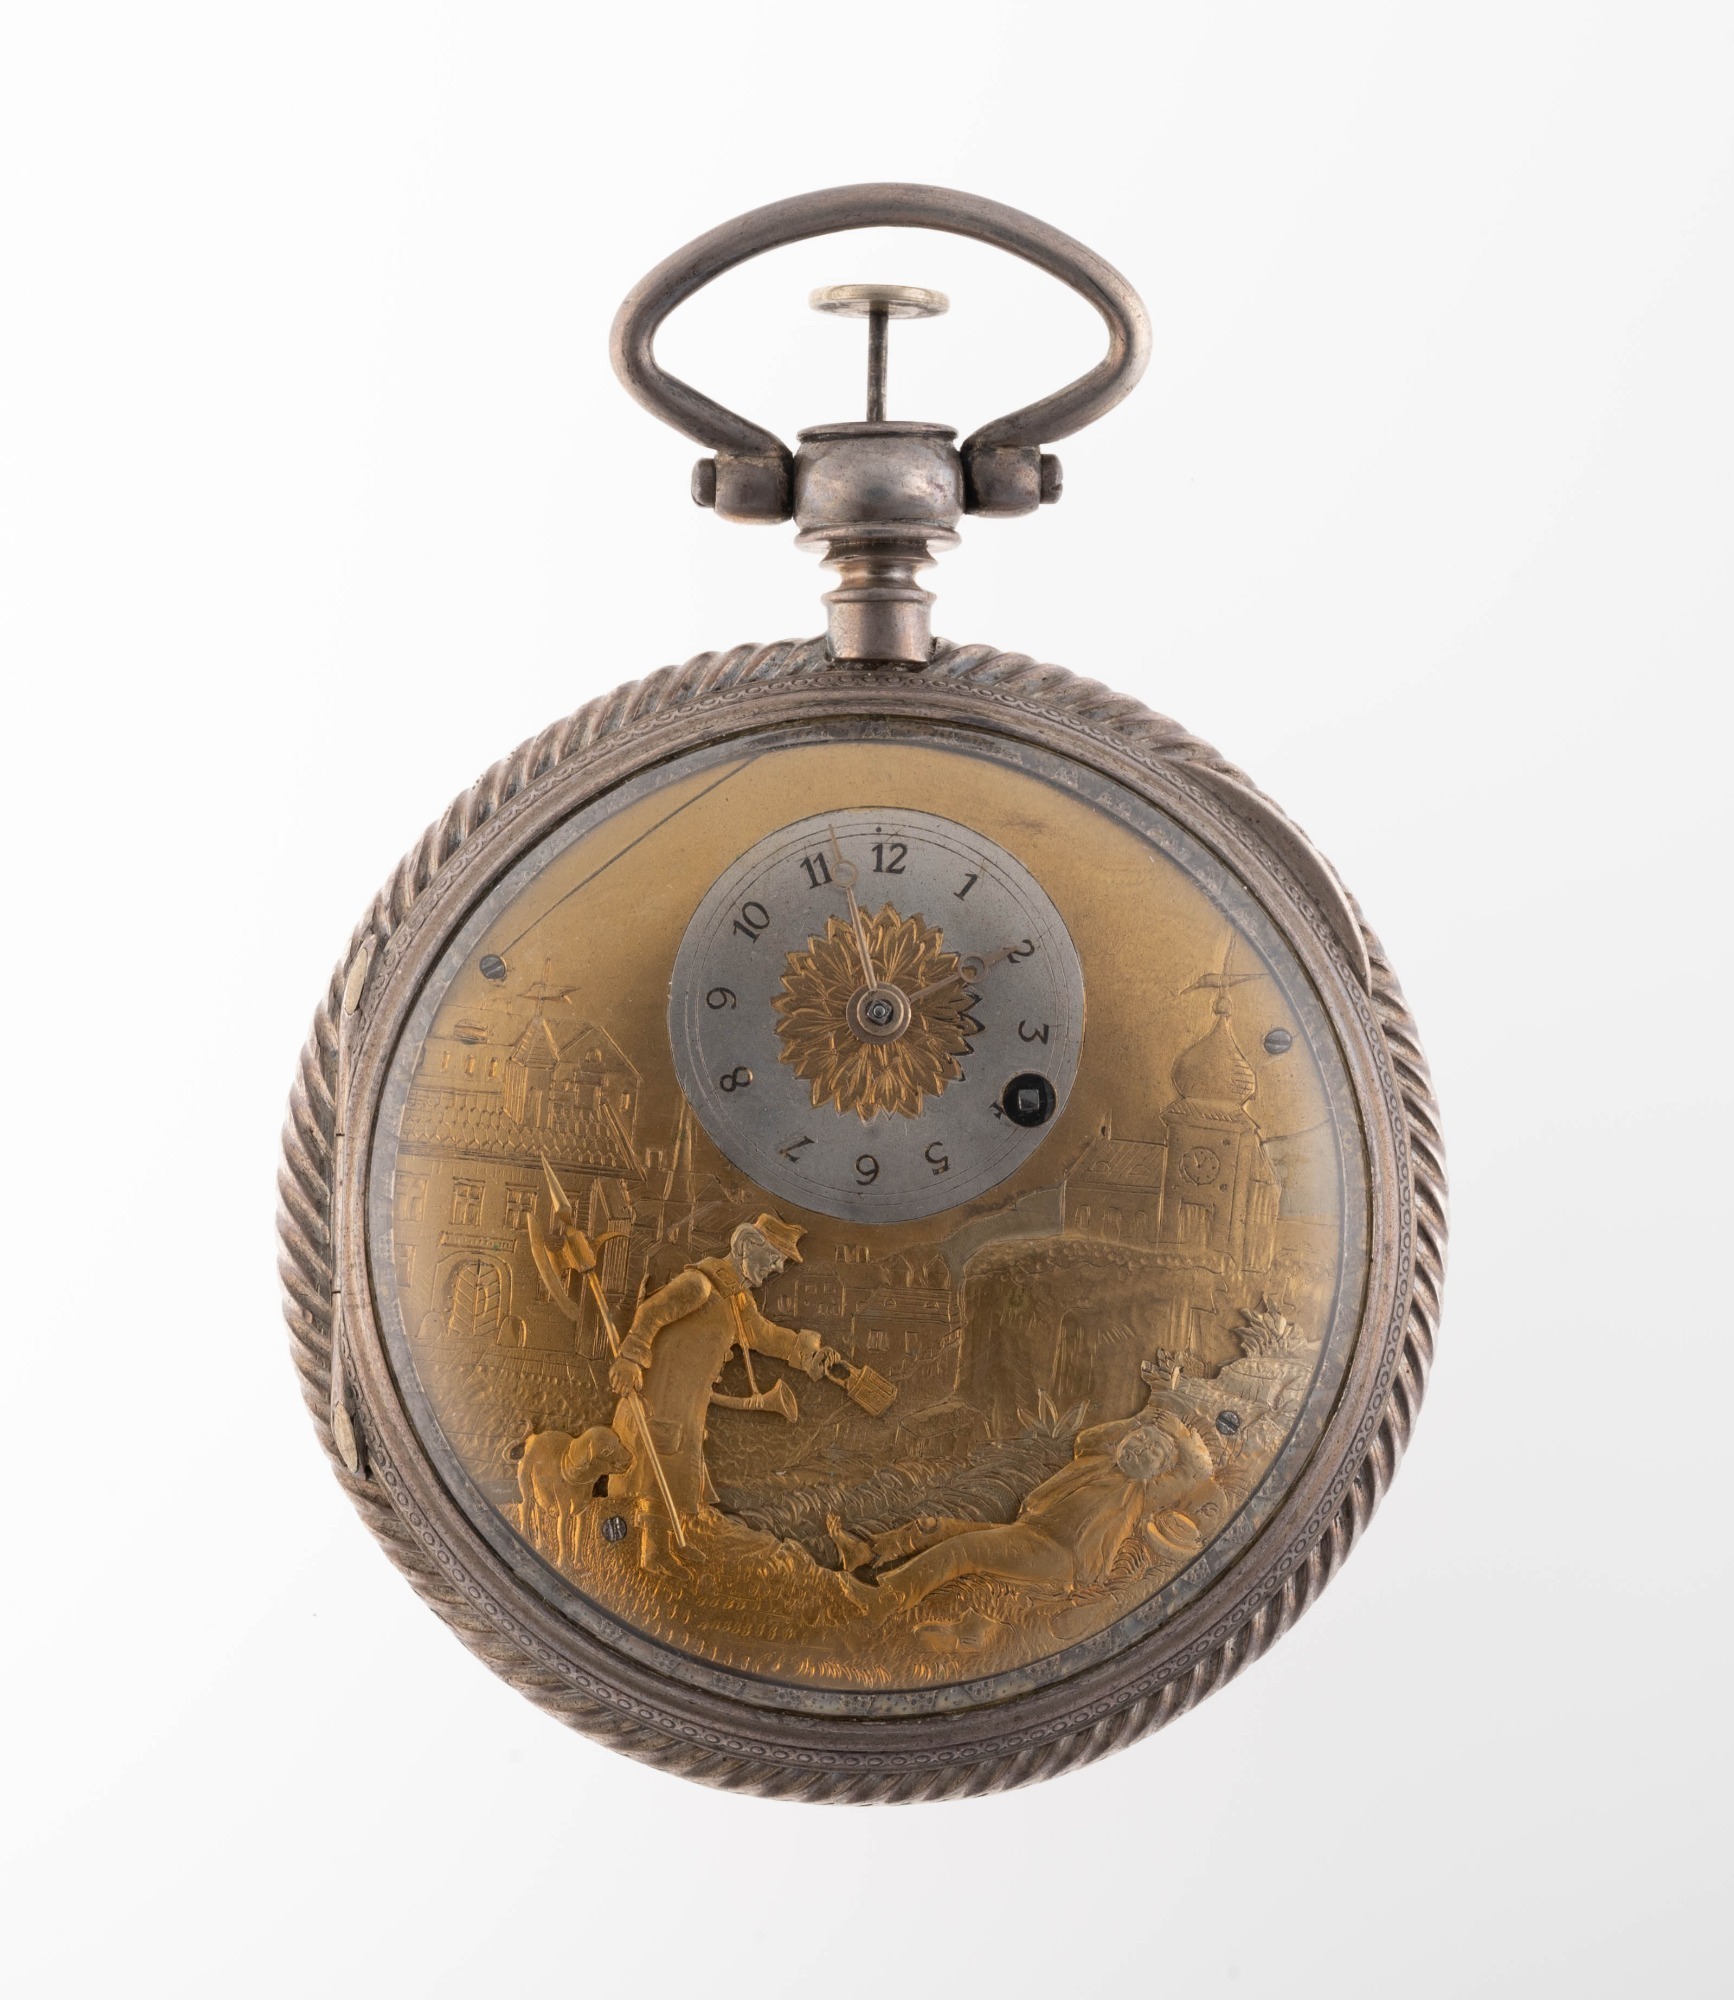 CHINESE MARKET FRENCH AUTOMATON 1/4 HOUR REPEATER SILVER POCKET WATCH